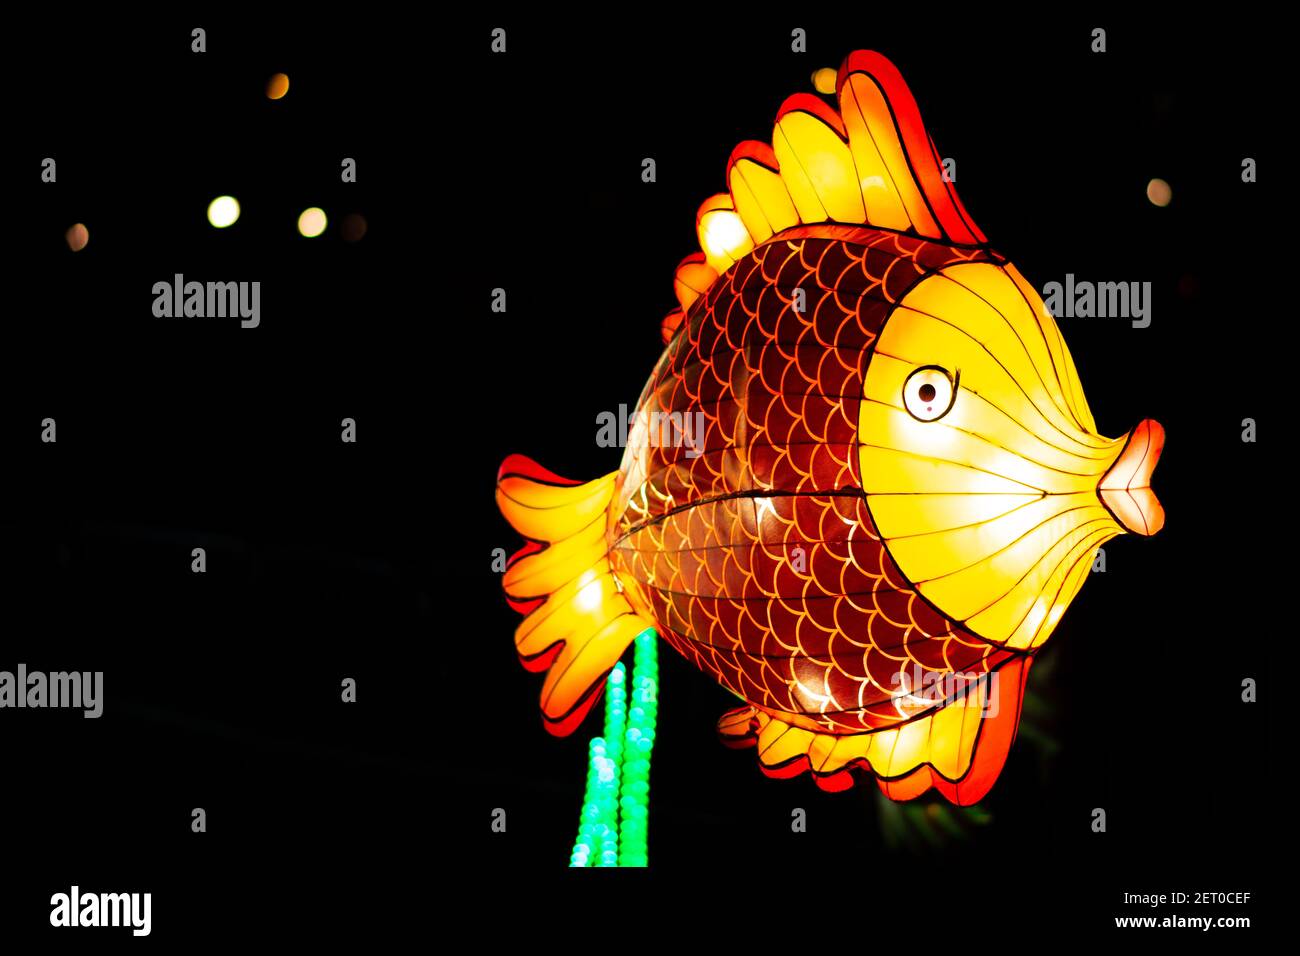 The Chinese Lantern Festival at the Limanski park in Novi Sad. The culmination of the Festival. A colorful fish lantern is floating in the air. Stock Photo